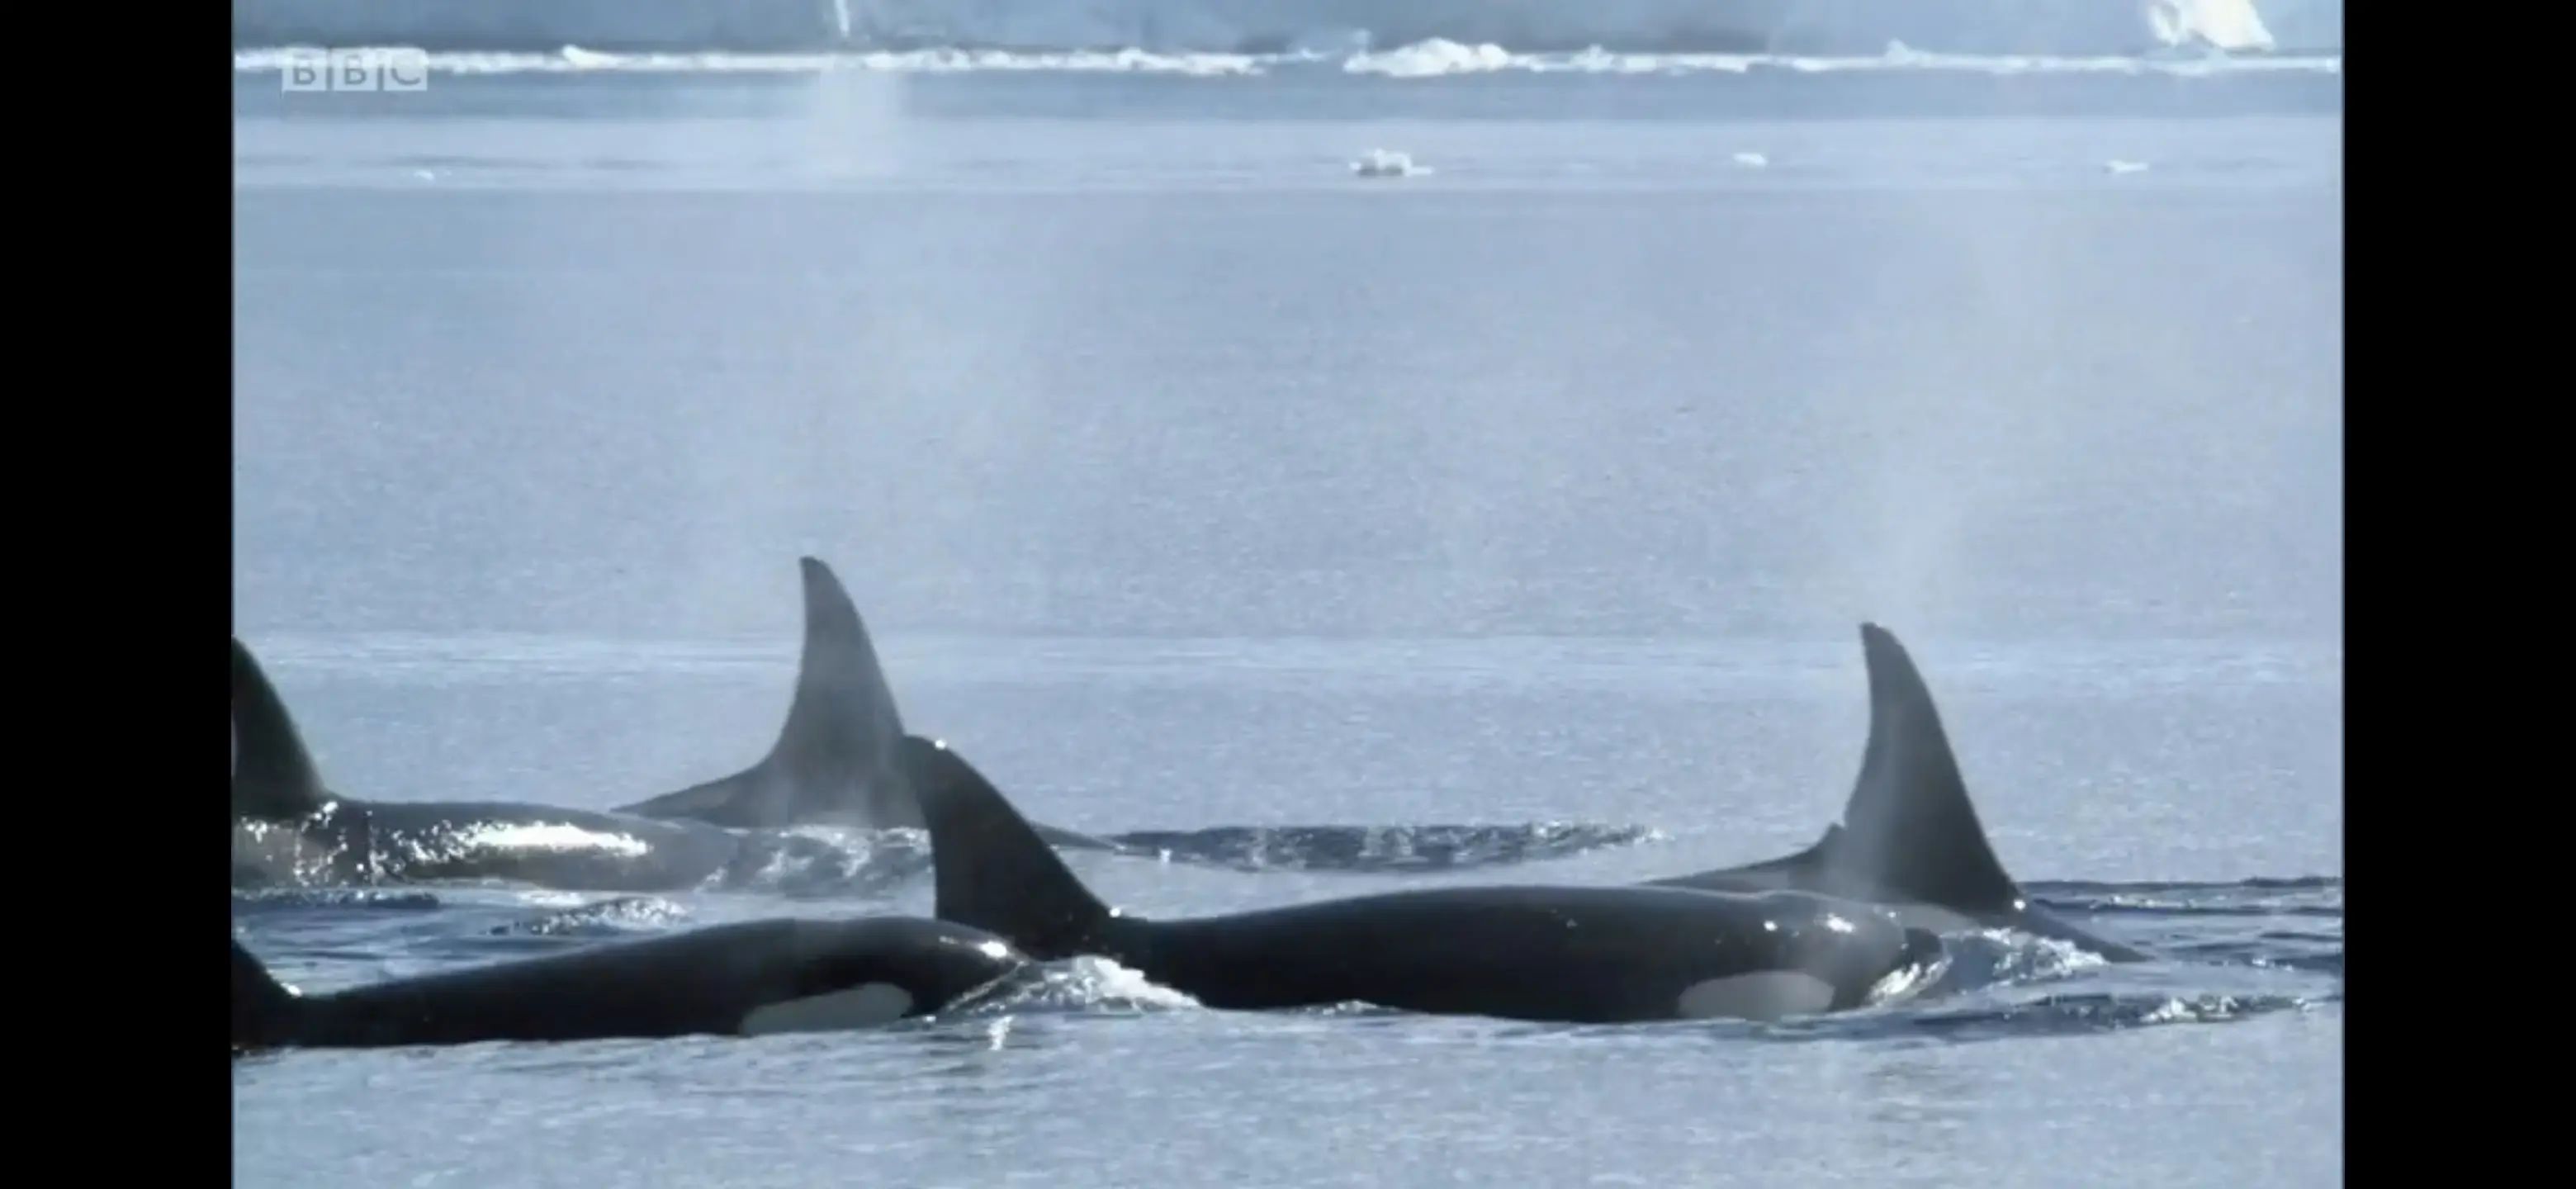 Killer whale (Orcinus orca) as shown in Frozen Planet - On Thin Ice